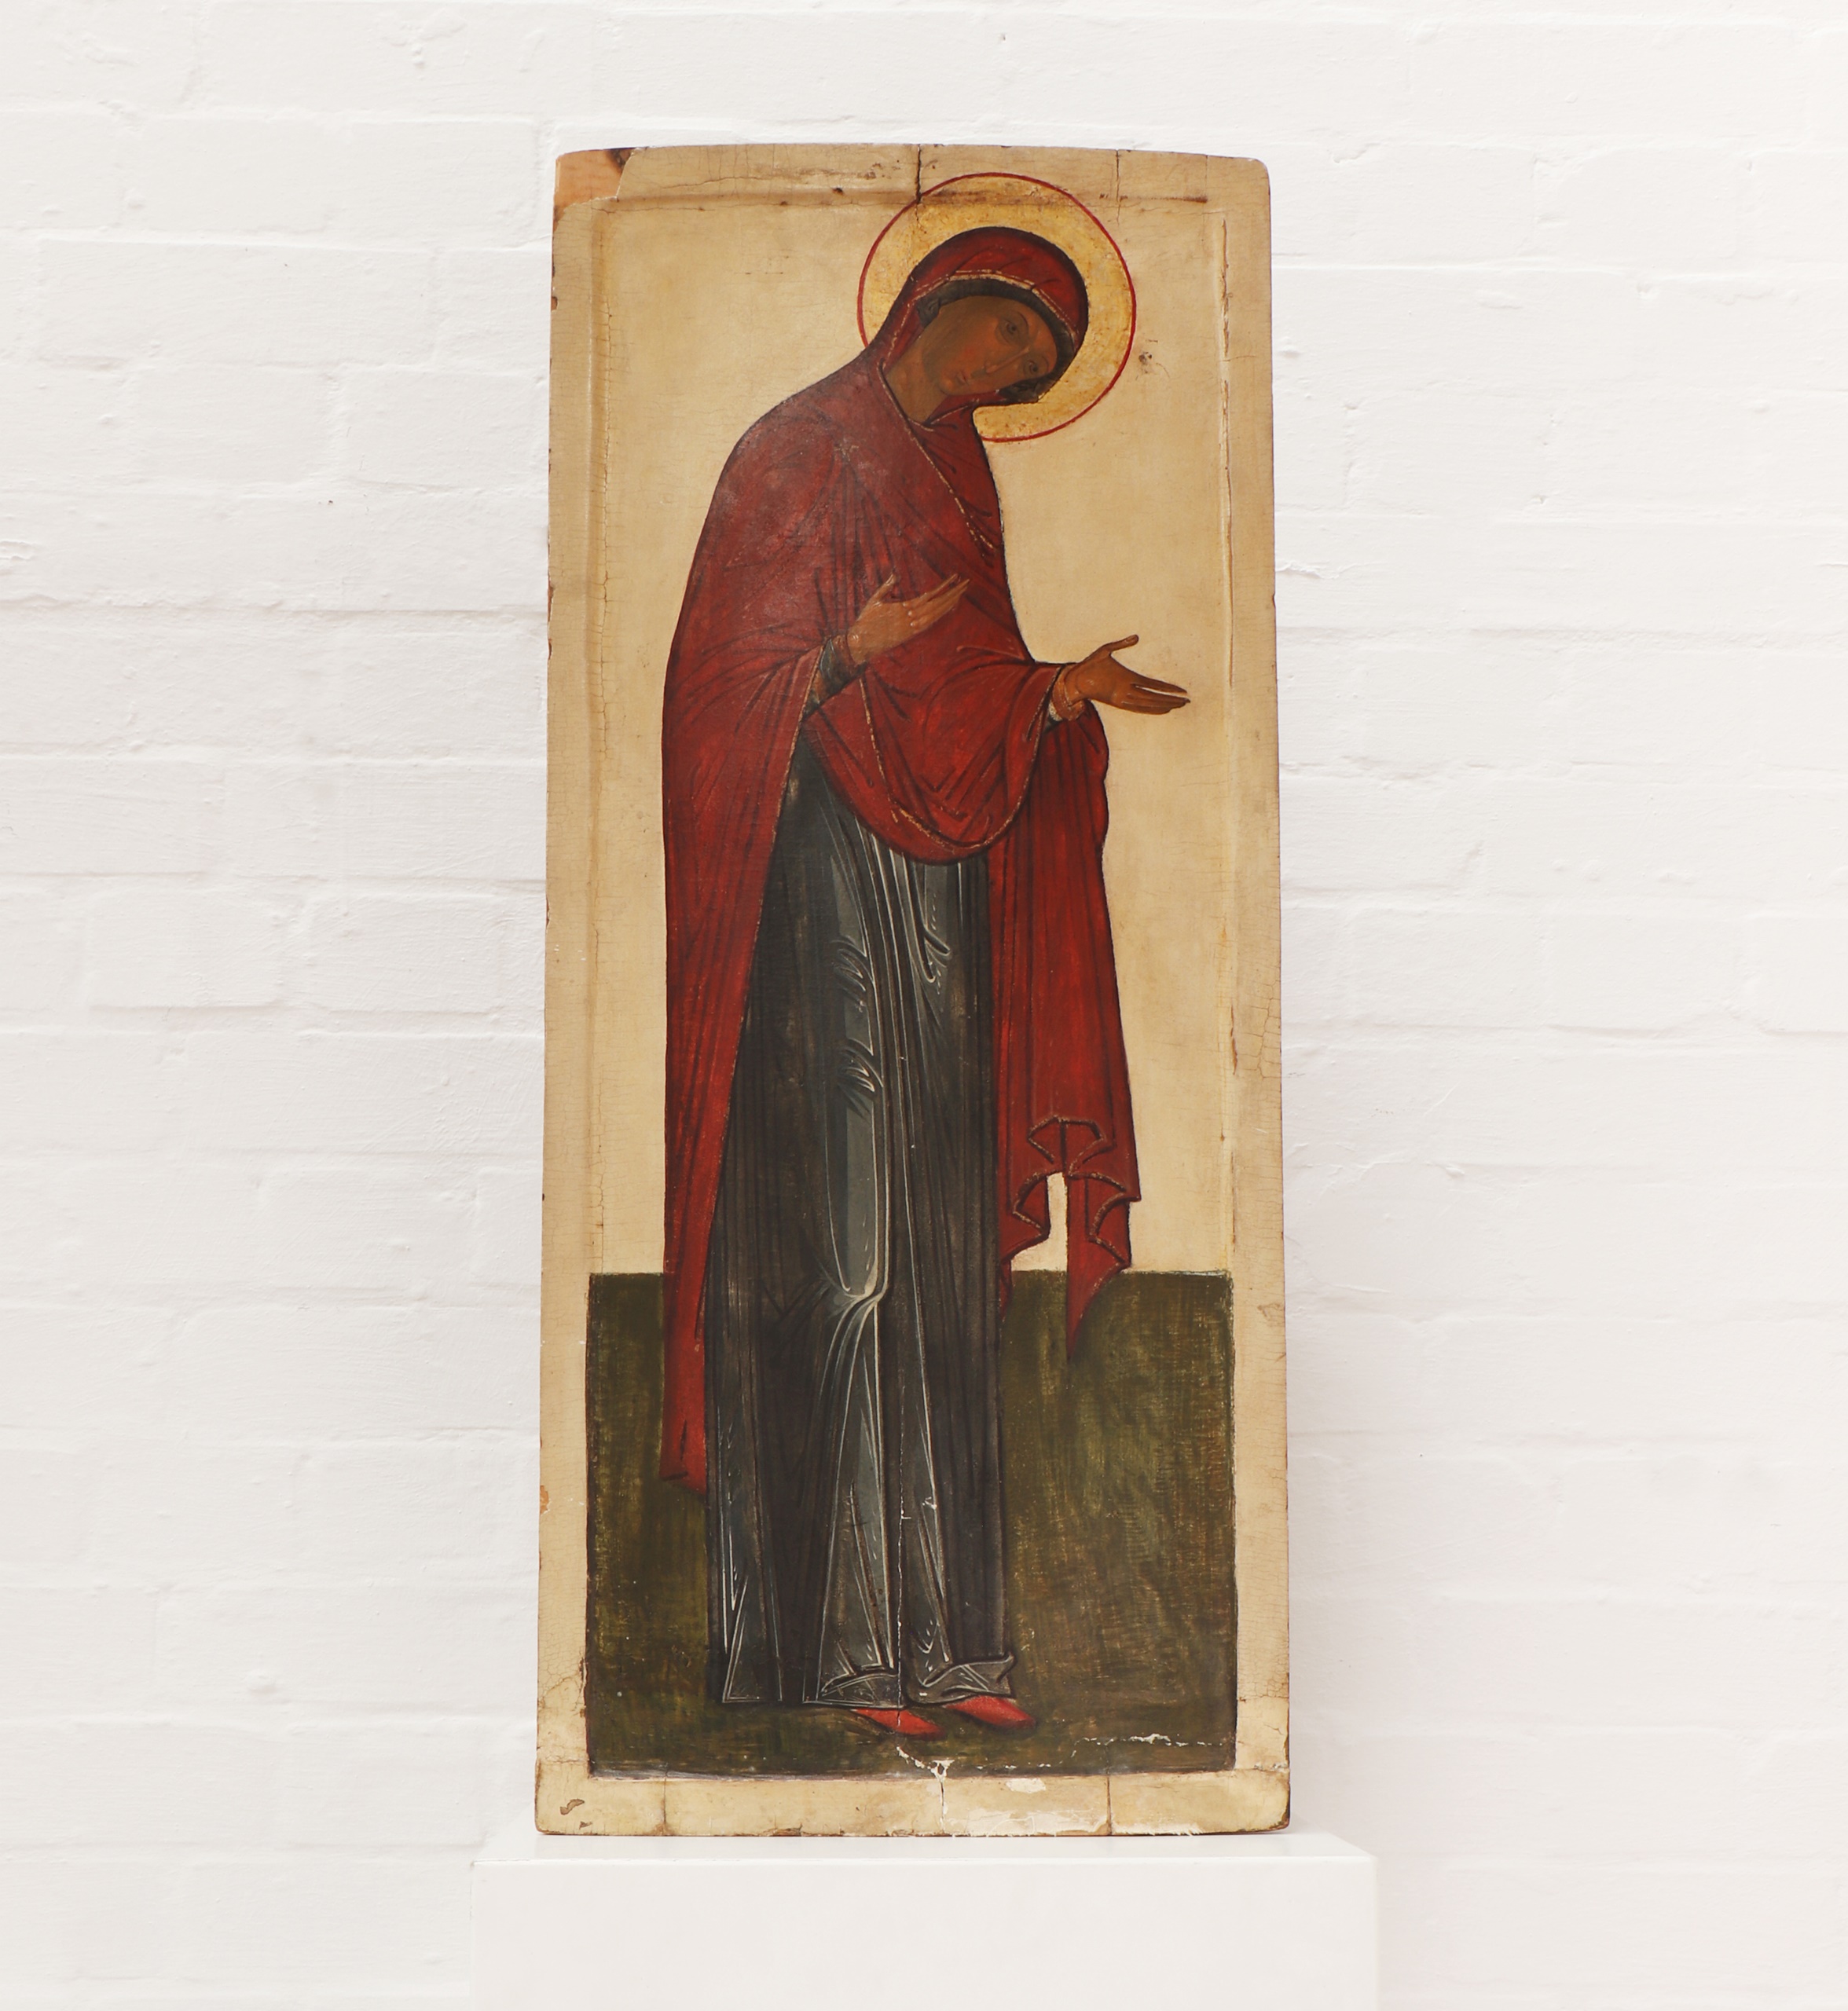 A large icon of the Mother of God - The George R Hann Collection